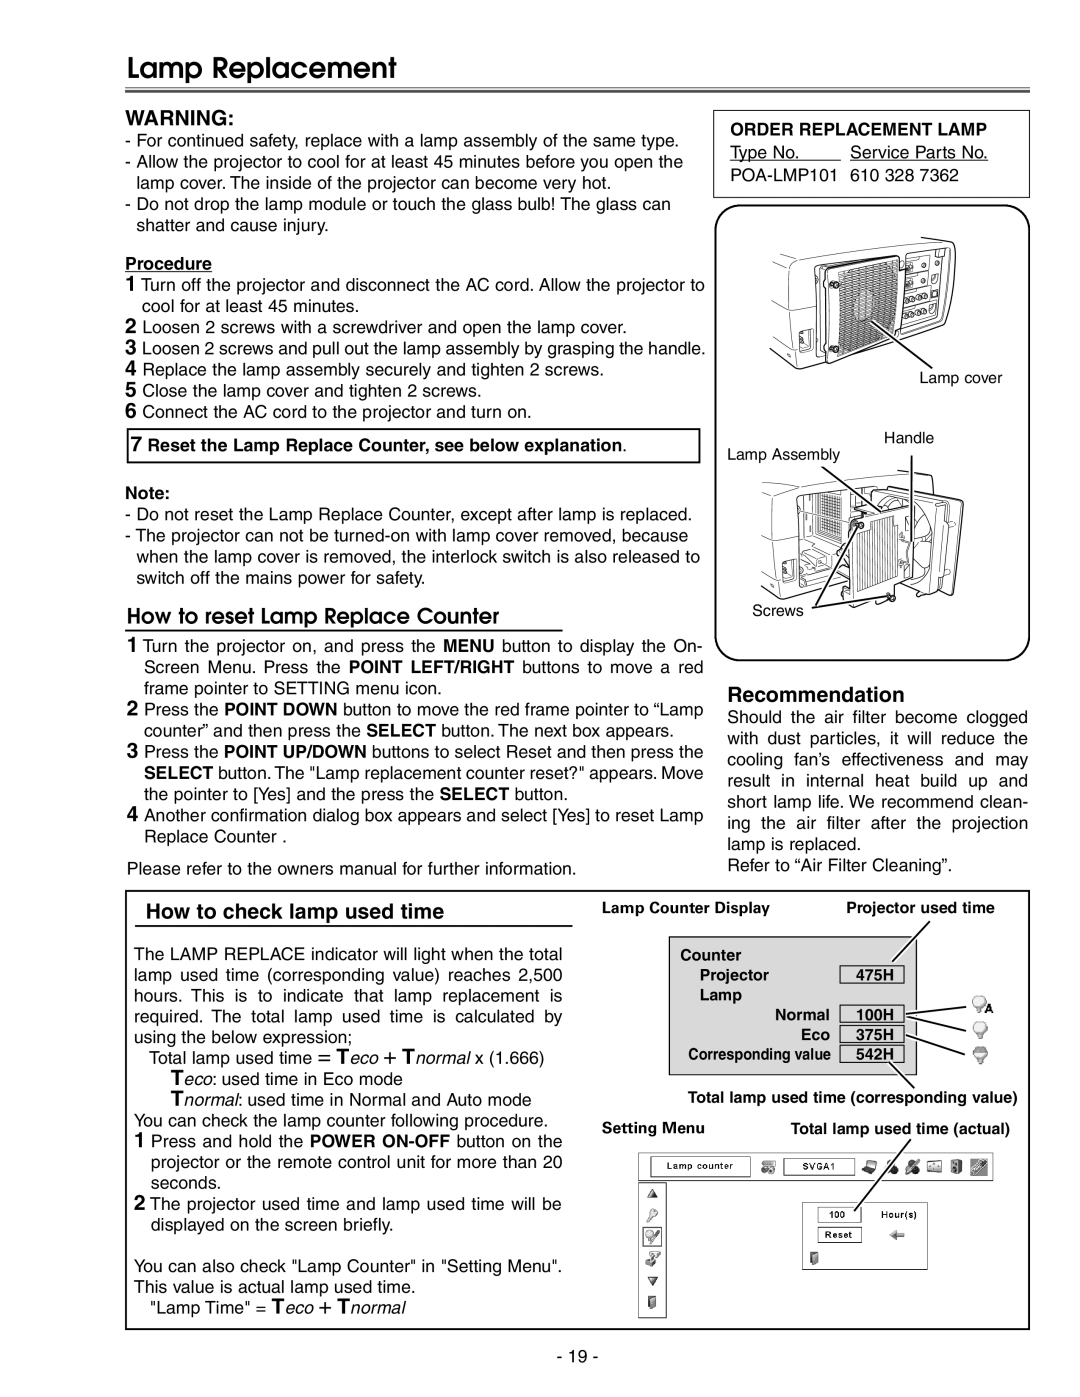 Eiki LC-X71 LC-X71L Lamp Replacement, How to reset Lamp Replace Counter, Recommendation, How to check lamp used time 